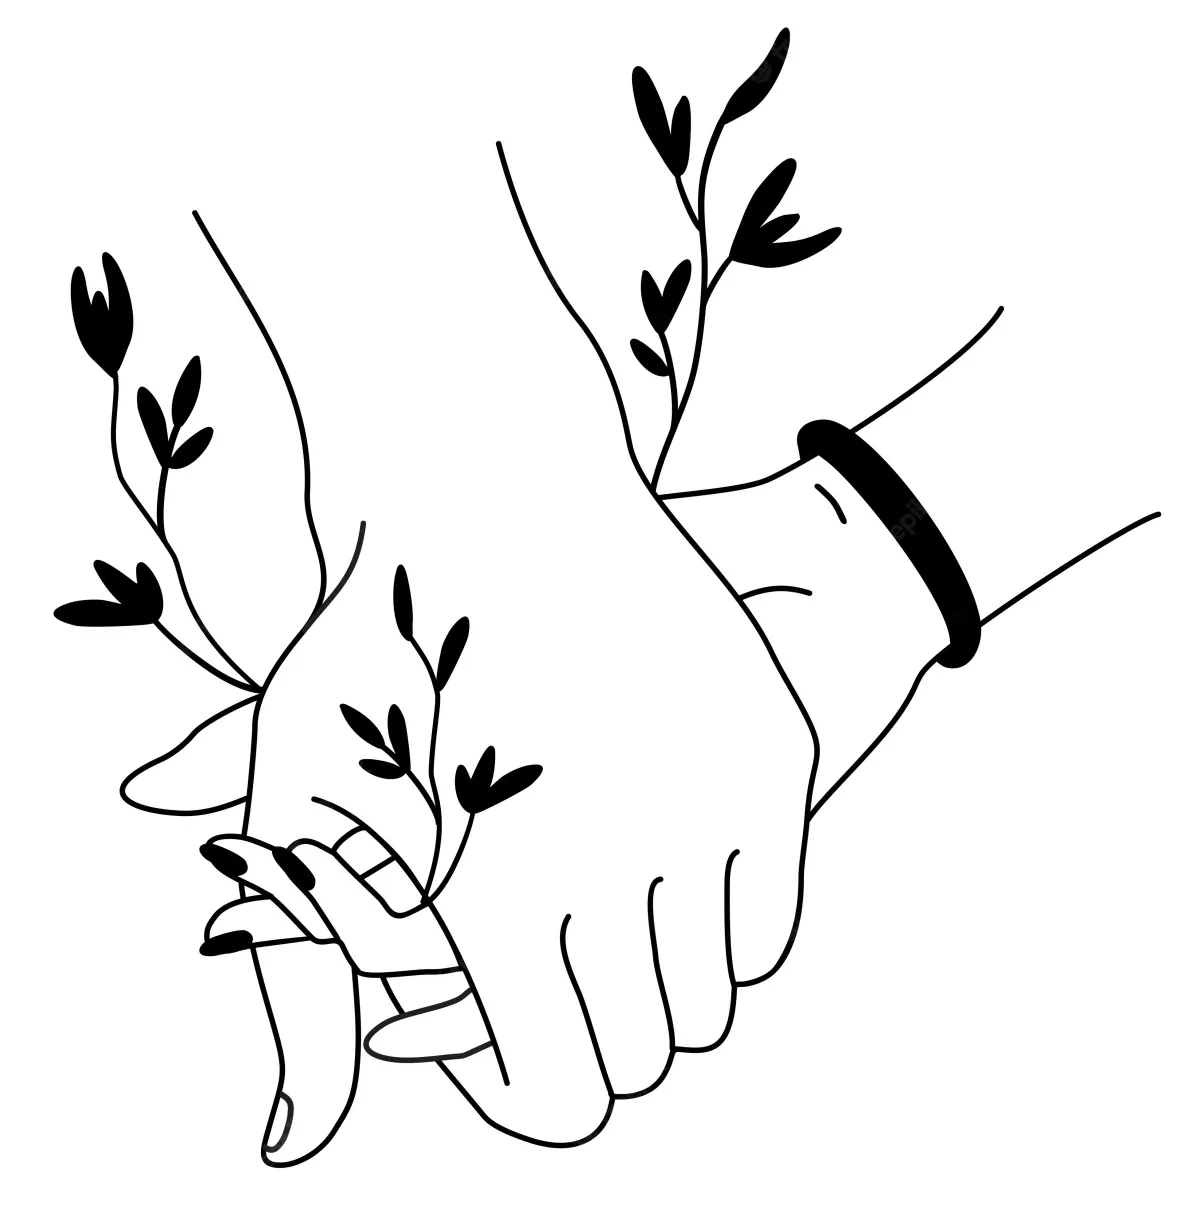 two hands express strong union with black on white graphic